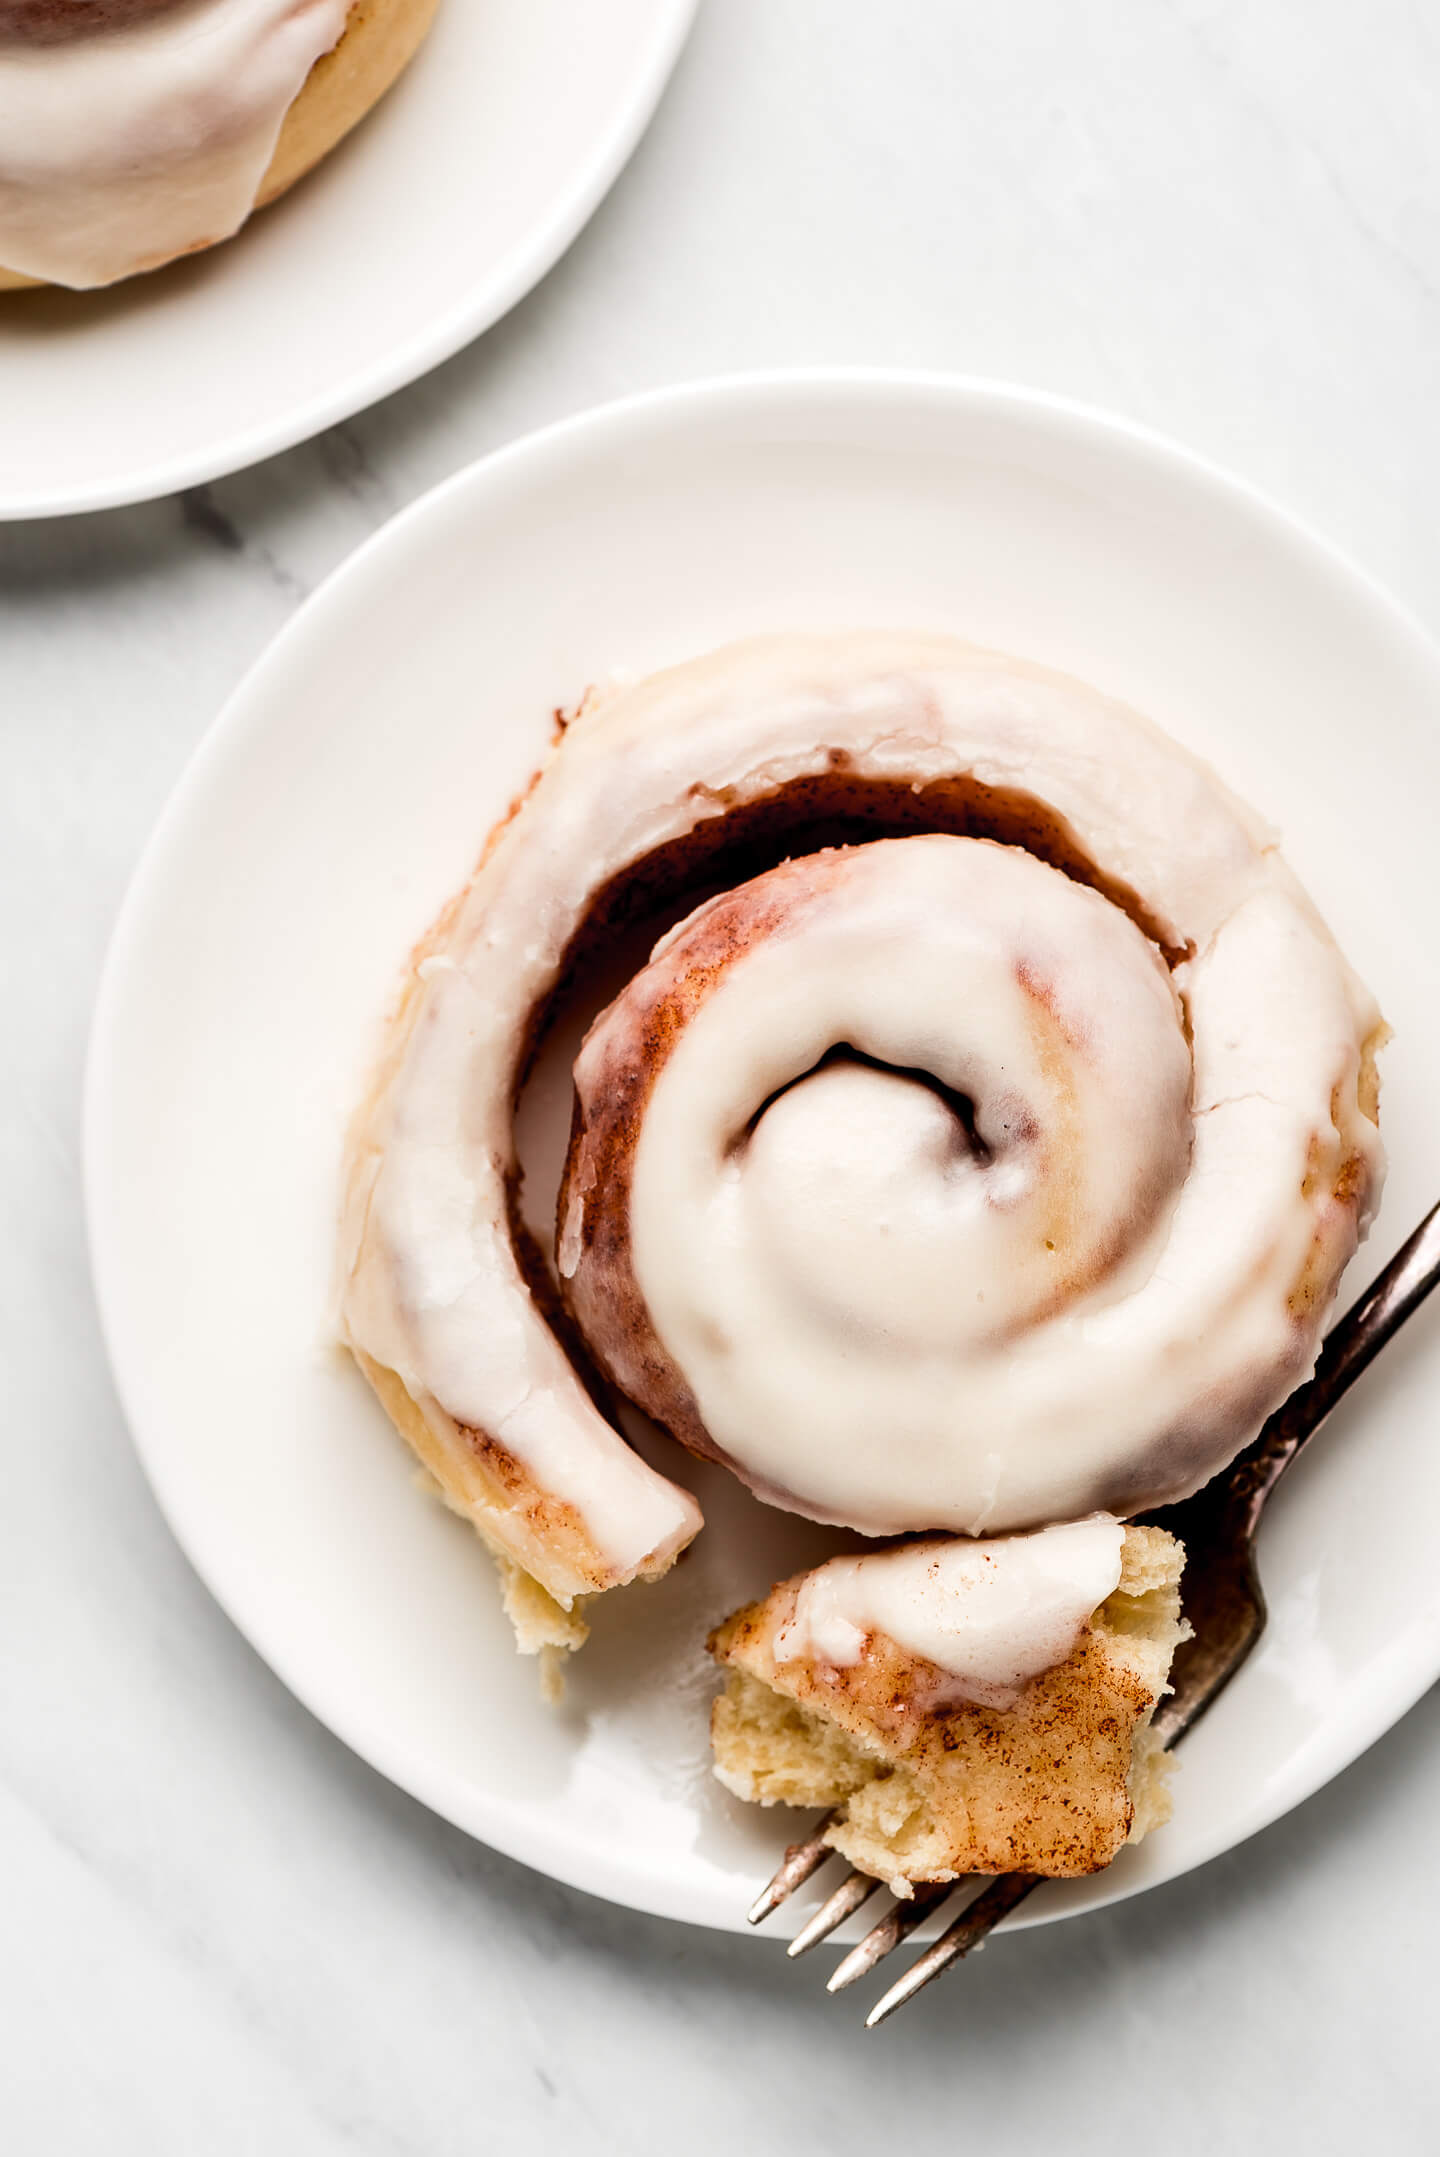 Frosted Cinnamon Roll partially unwound with a piece cut off and on a fork.